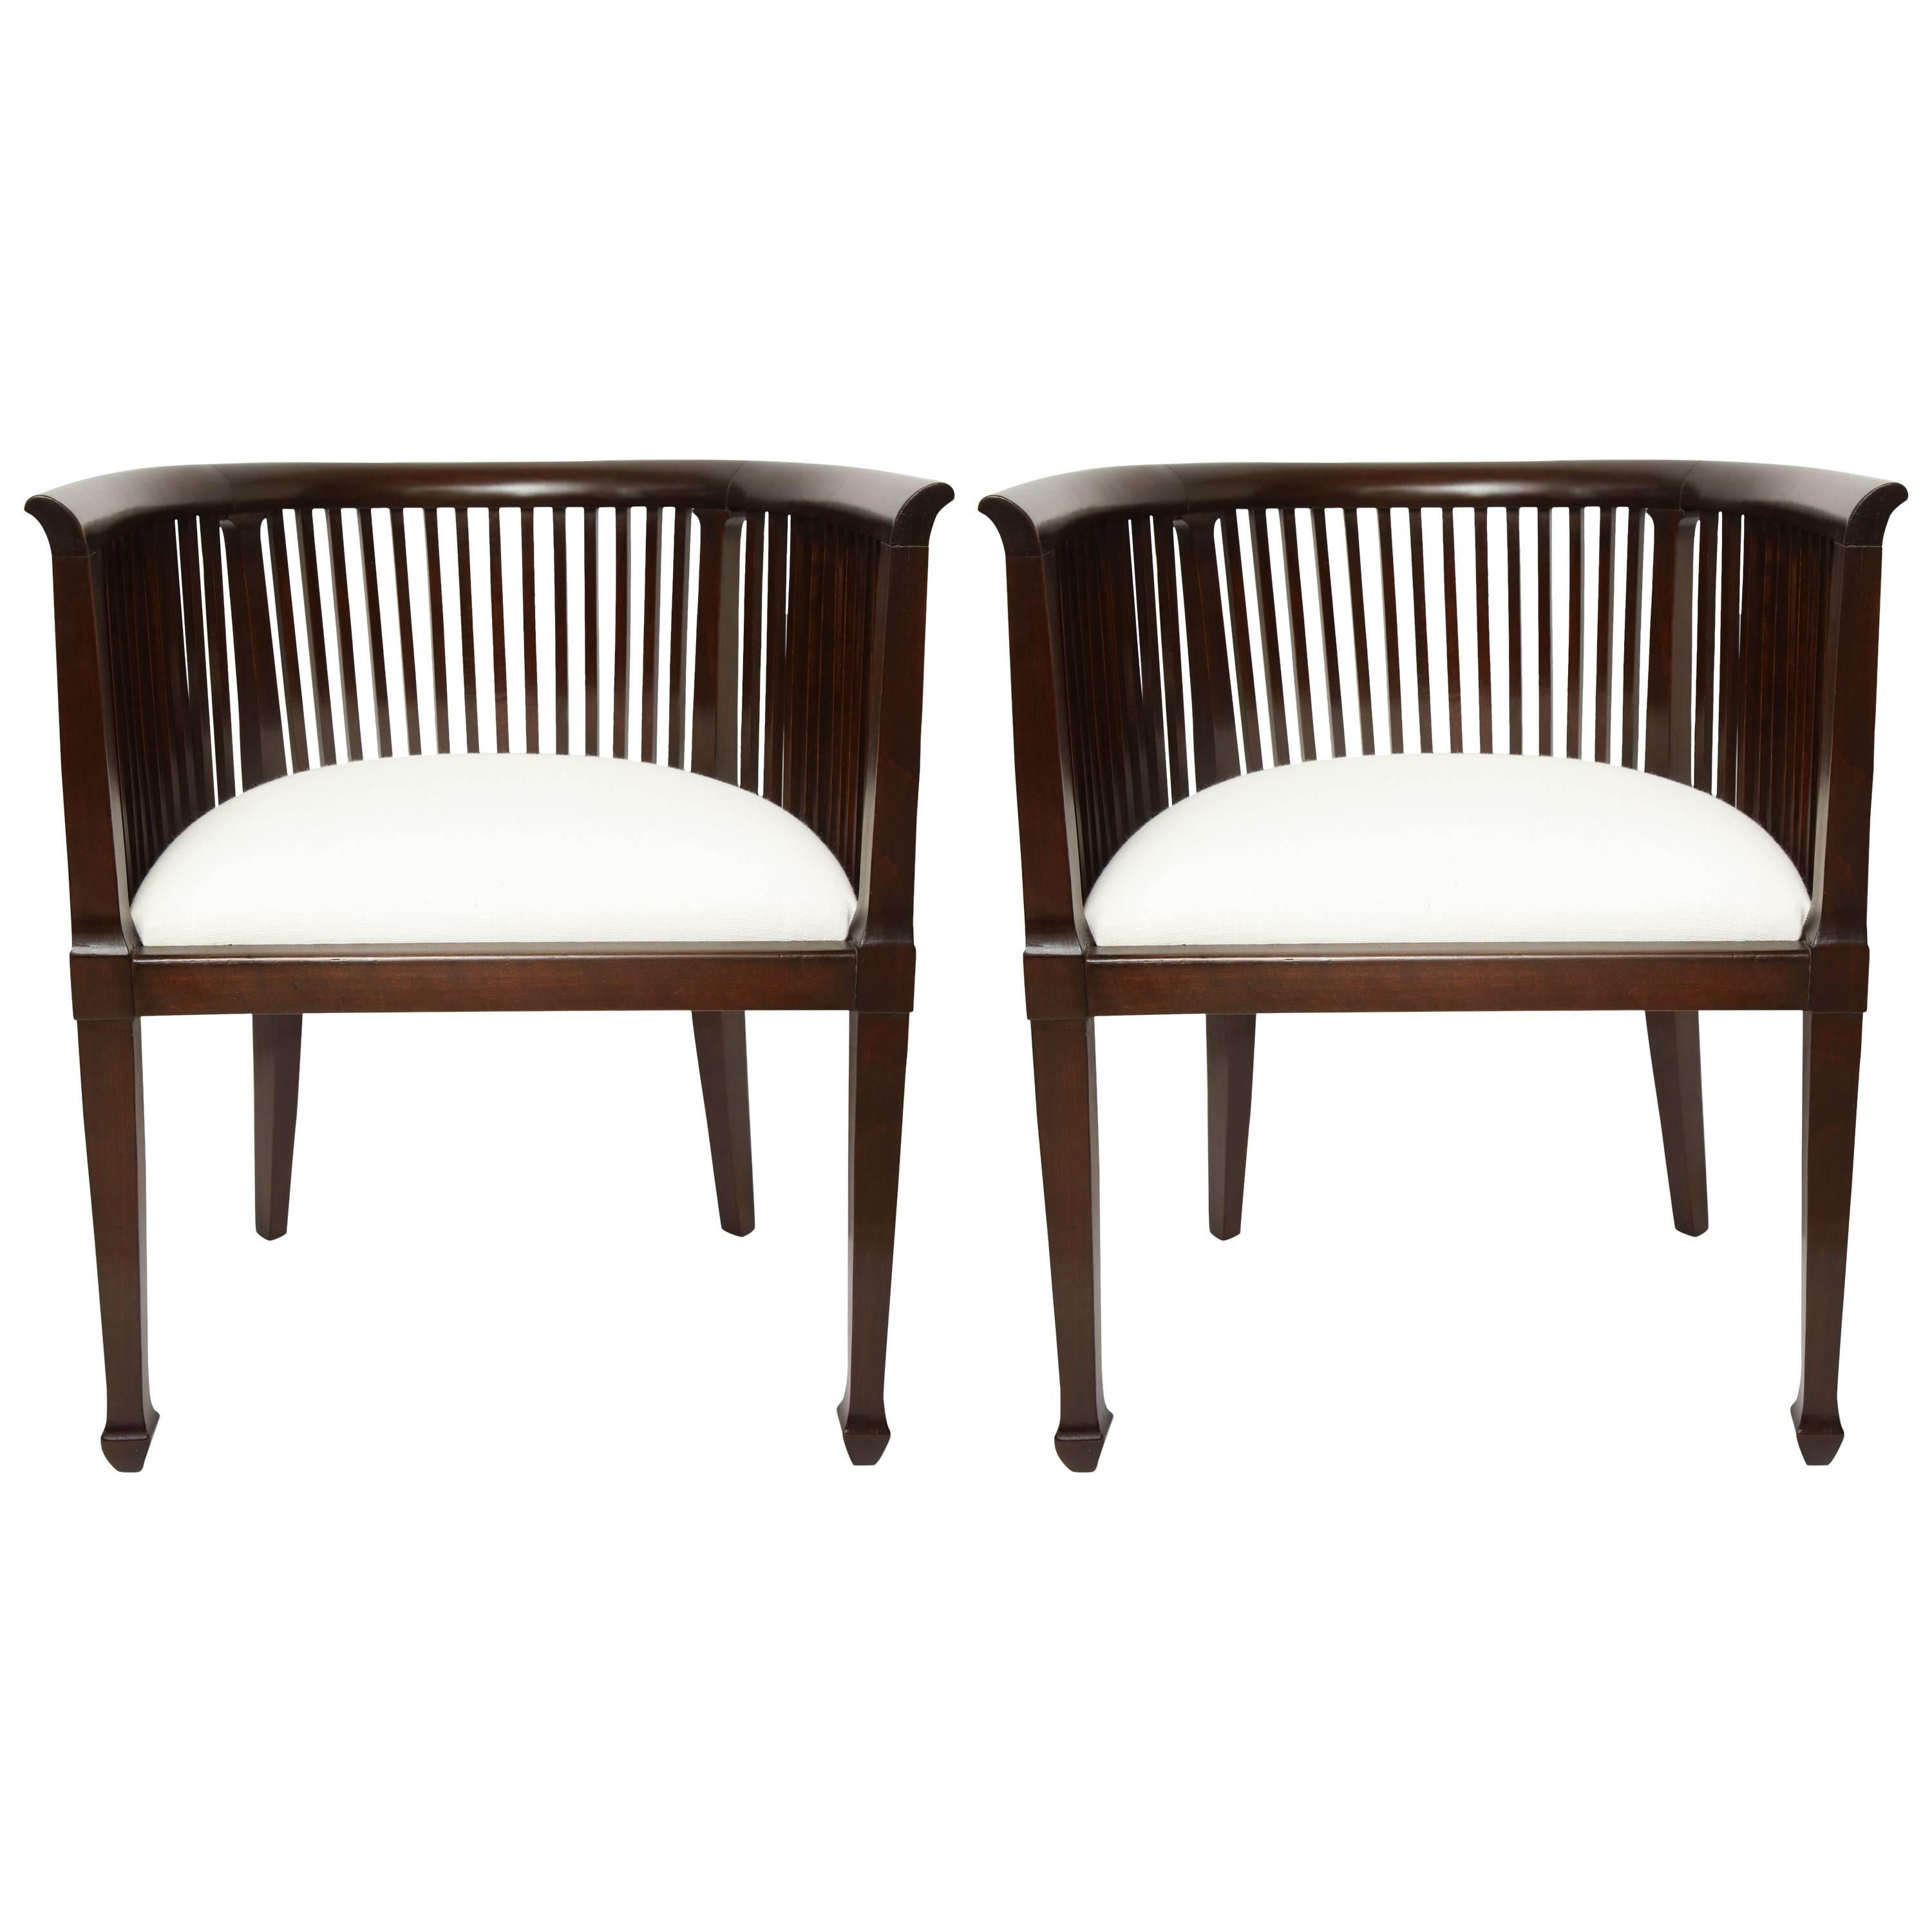 Pair of Slatted and Curved Back Mahogany Chairs, France, circa 1940s